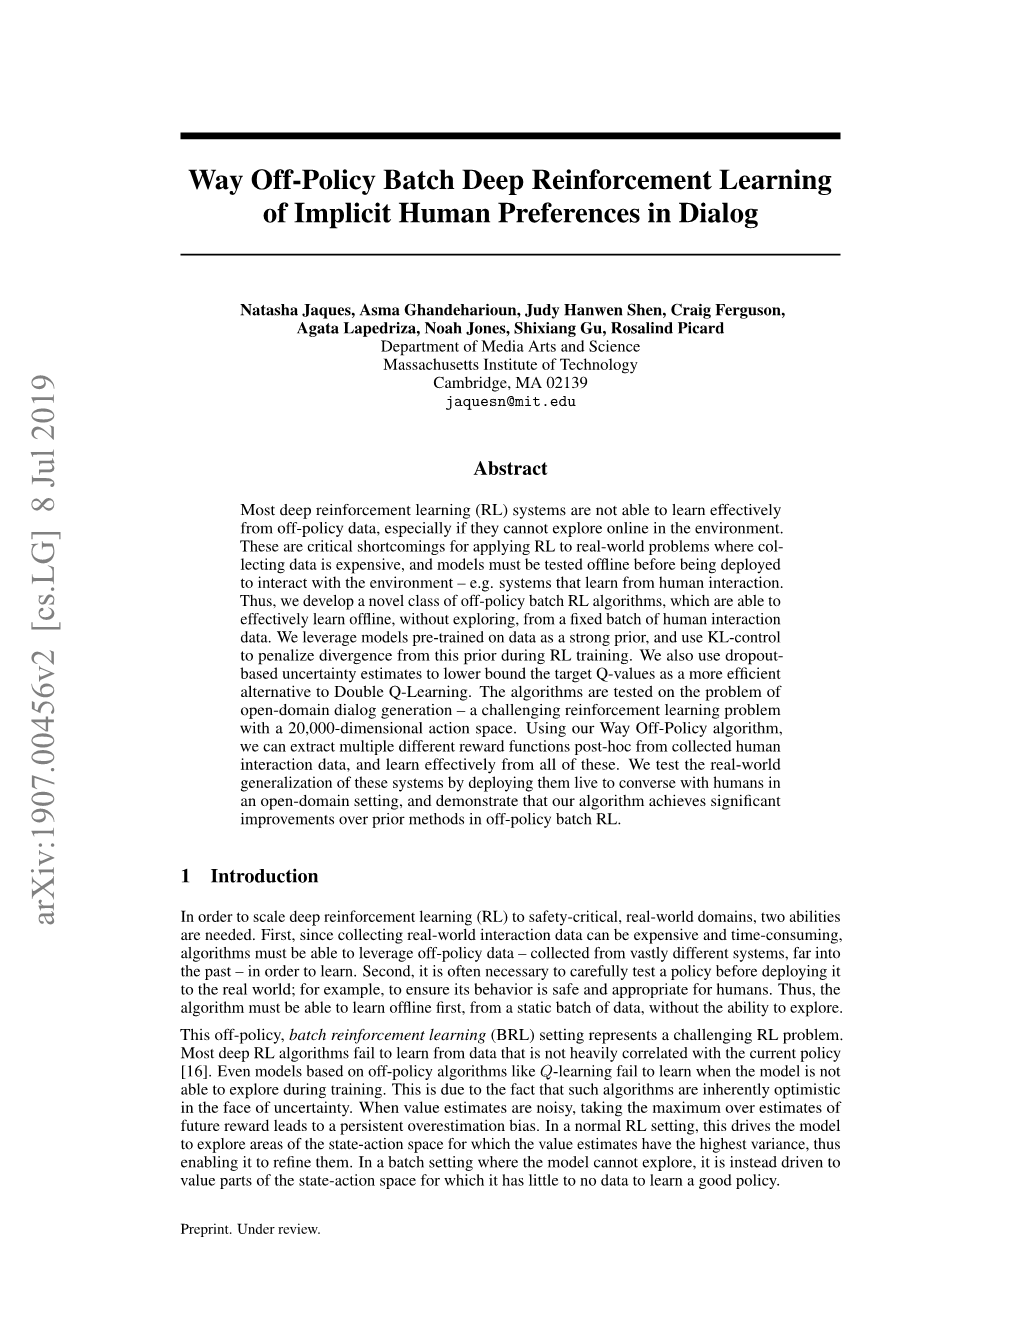 Way Off-Policy Batch Deep Reinforcement Learning of Implicit Human Preferences in Dialog